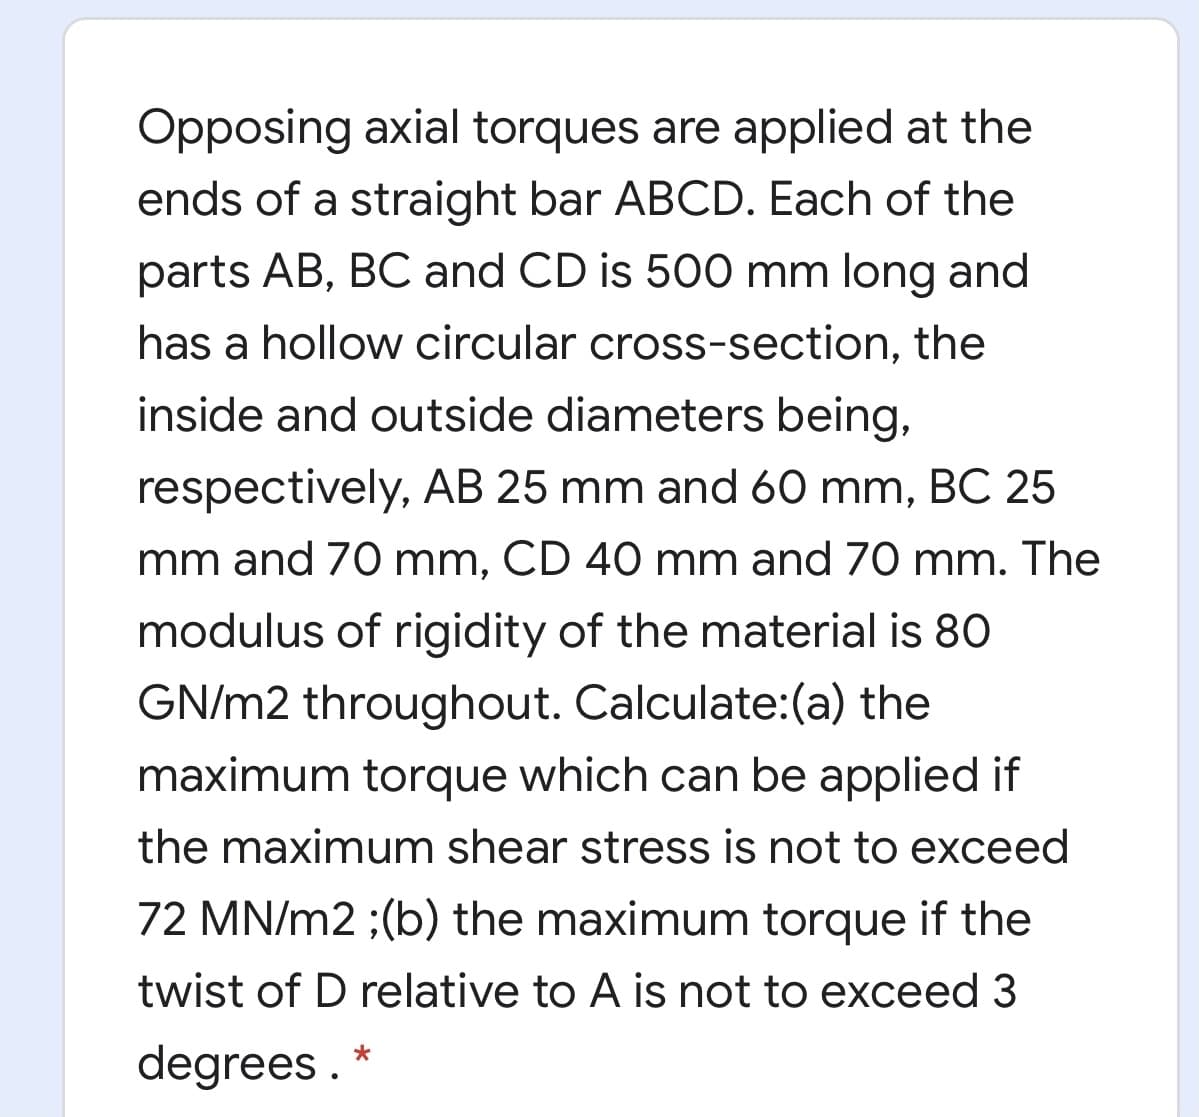 Opposing axial torques are applied at the
ends of a straight bar ABCD. Each of the
parts AB, BC and CD is 500 mm long and
has a hollow circular cross-section, the
inside and outside diameters being,
respectively, AB 25 mm and 60 mm, BC 25
mm and 70 mm, CD 40 mm and 70 mm. The
modulus of rigidity of the material is 80
GN/m2 throughout. Calculate:(a) the
maximum torque which can be applied if
the maximum shear stress is not to exceed
72 MN/m2 ;(b) the maximum torque if the
twist of D relative to A is not to exceed 3
degrees .
